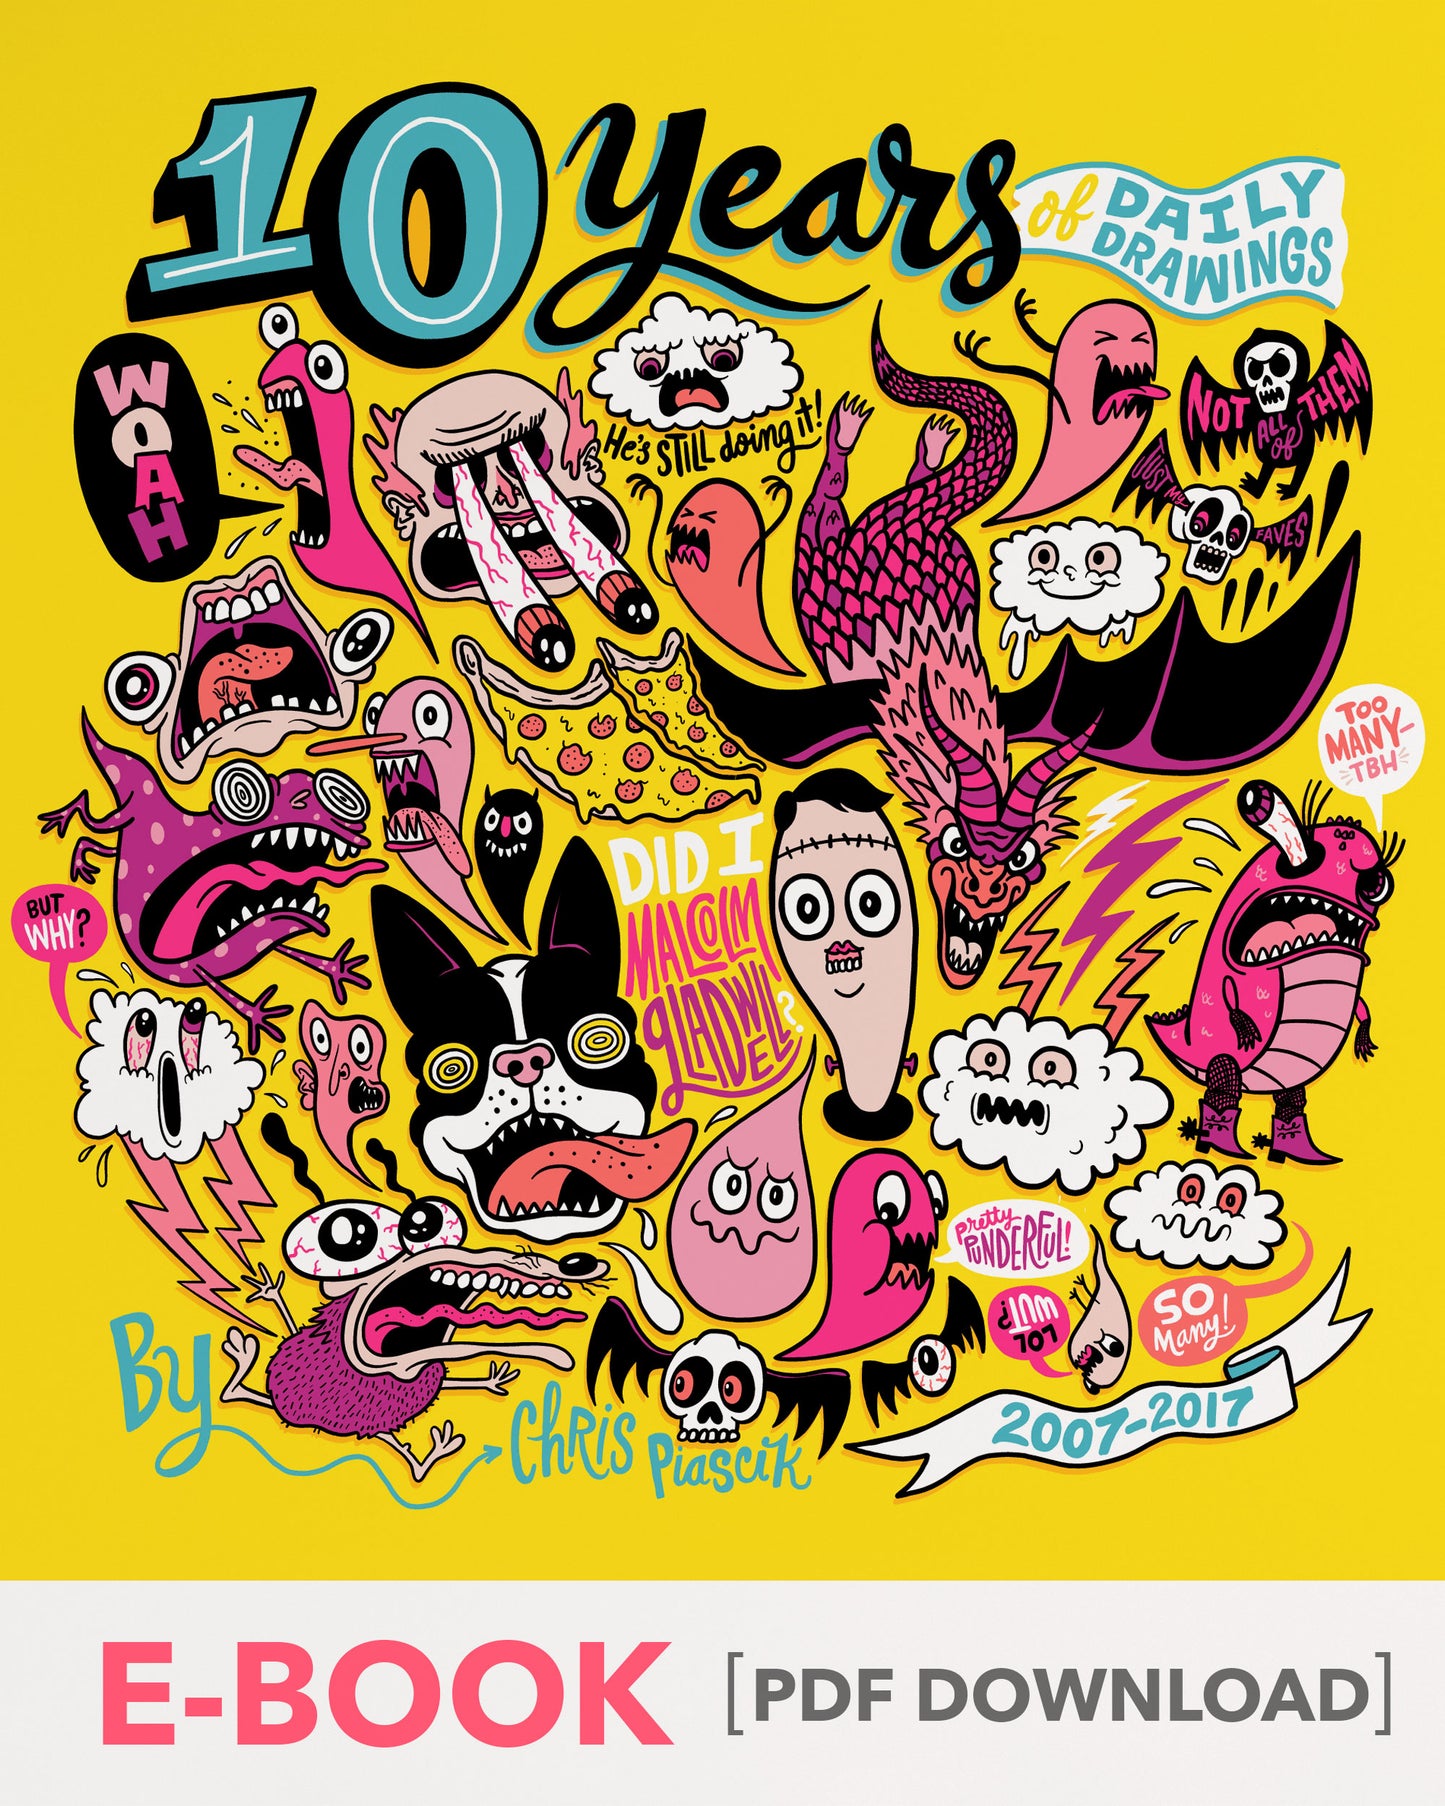 10 Years of Daily Drawings E-BOOK by Chris Piascik